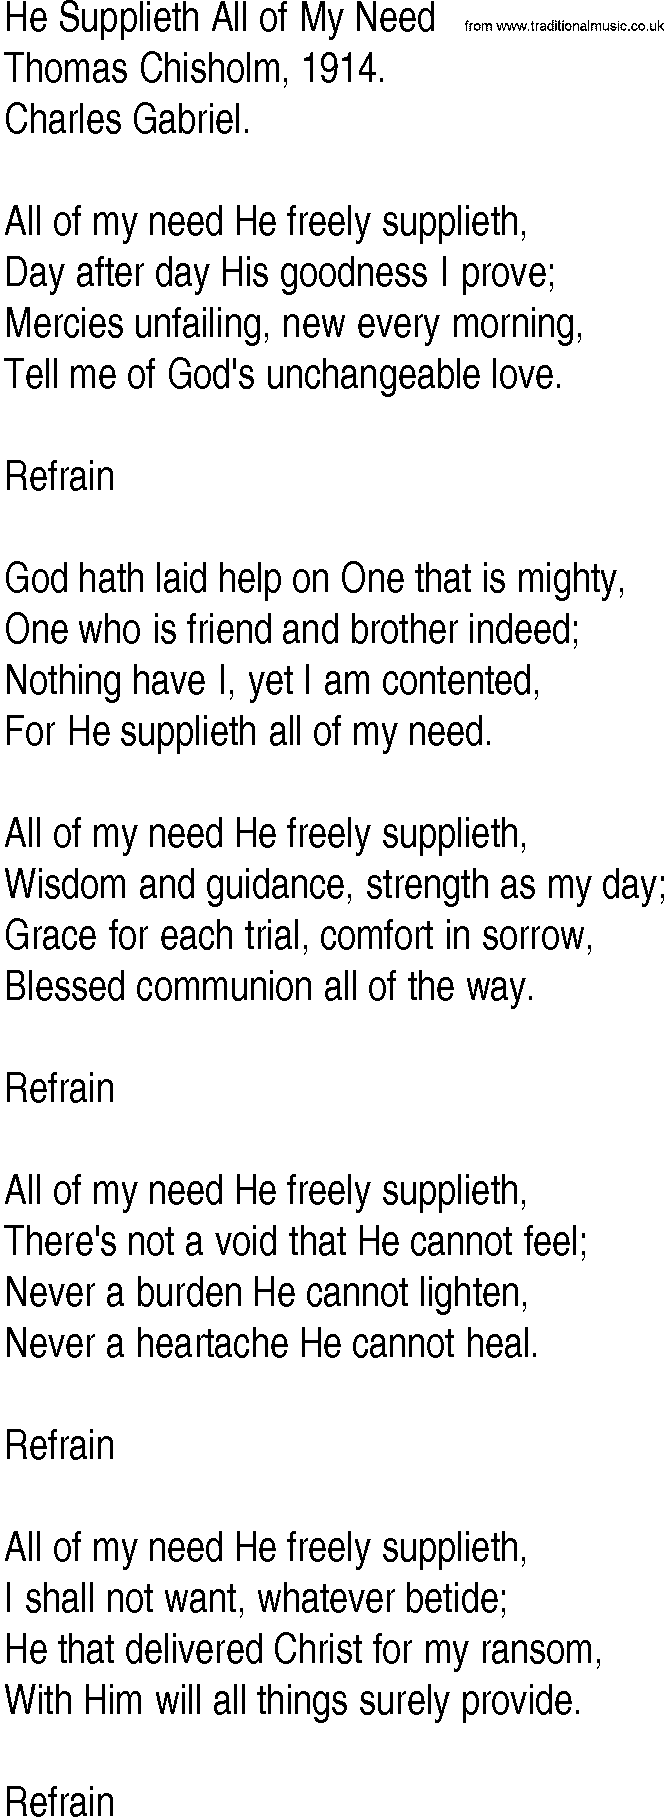 Hymn and Gospel Song: He Supplieth All of My Need by Thomas Chisholm lyrics